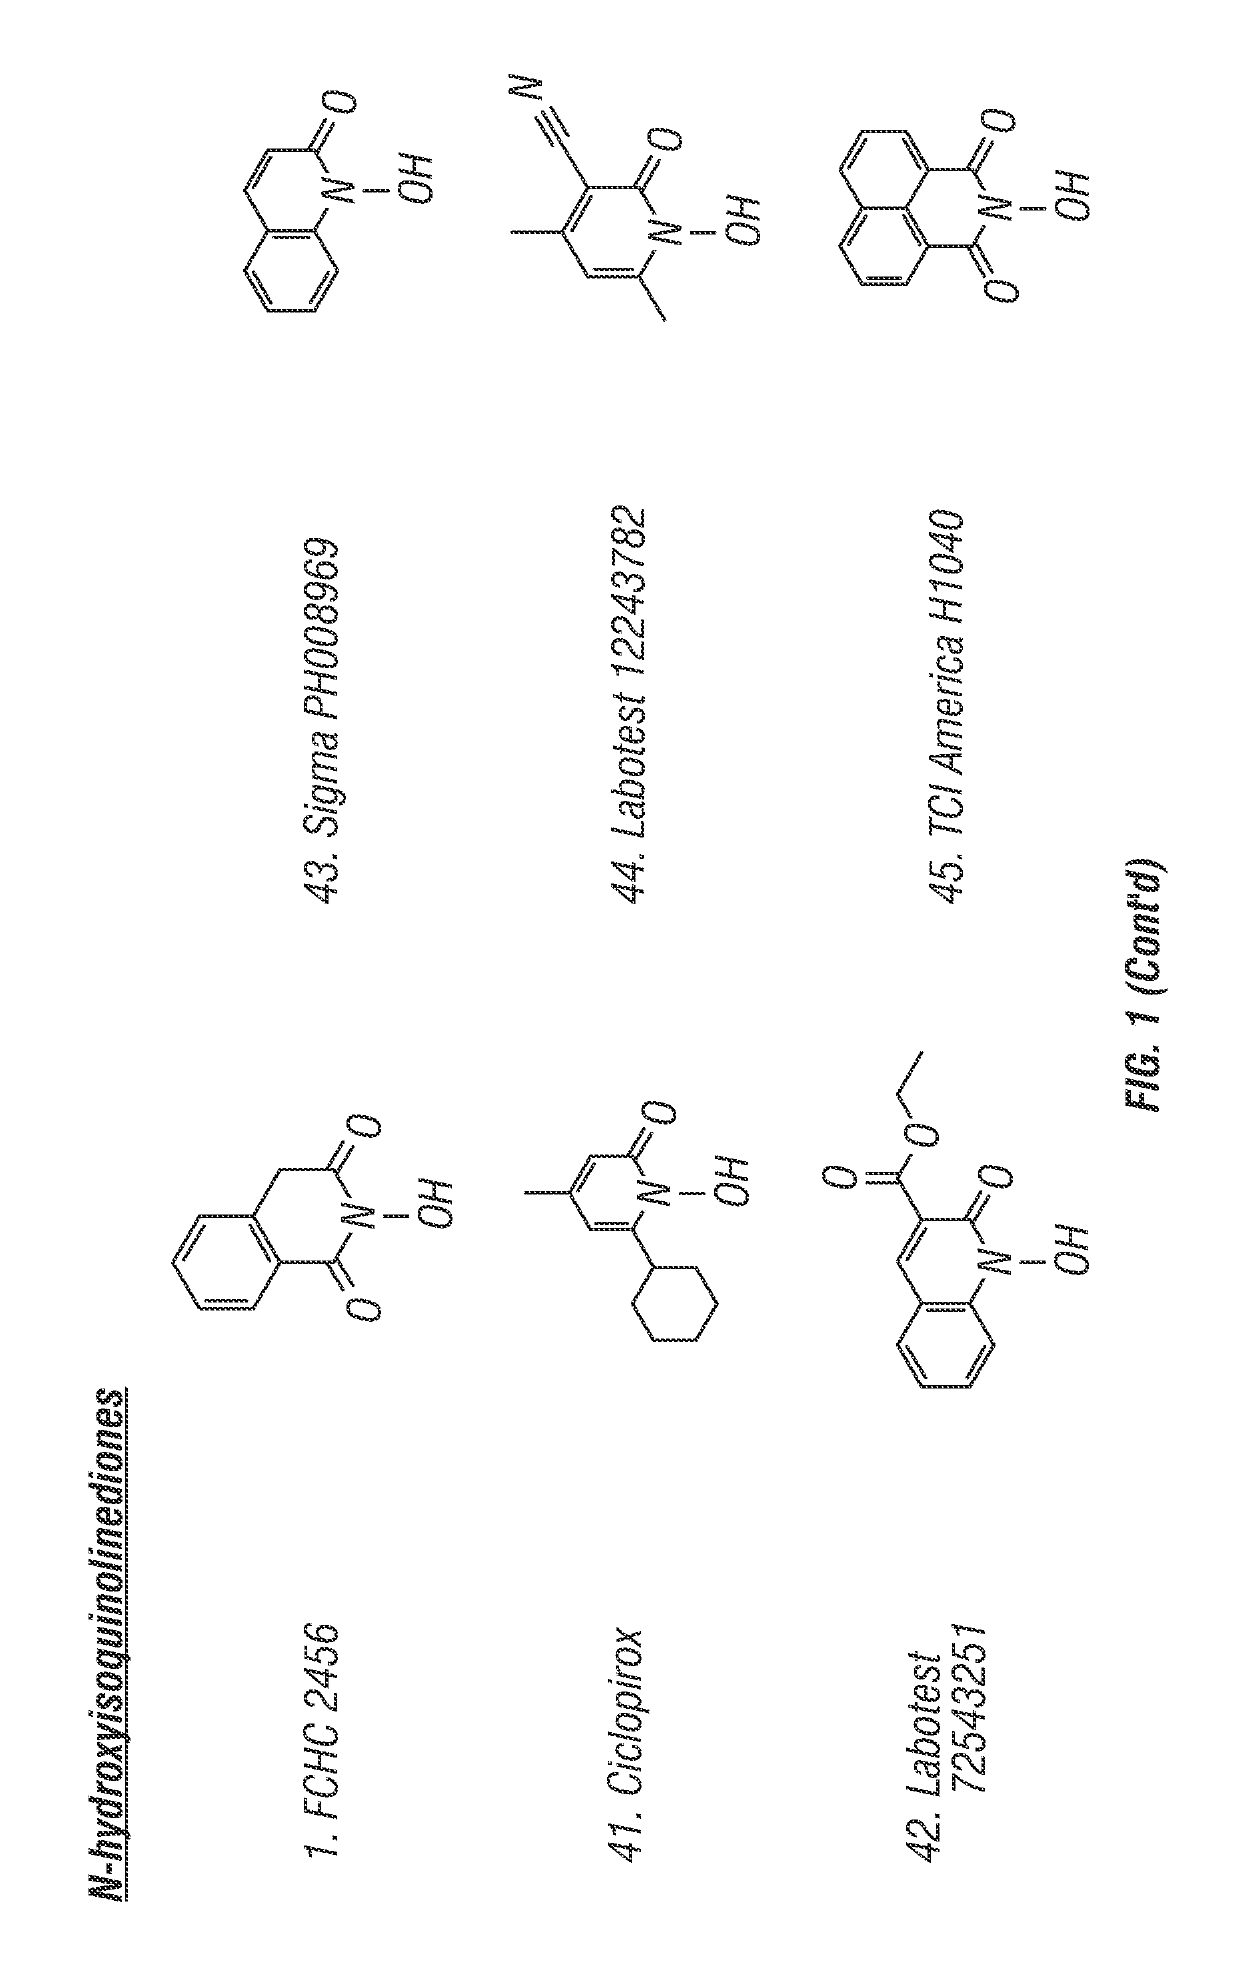 Inhibitors of HSV nucleotidyl transferases and uses therefor